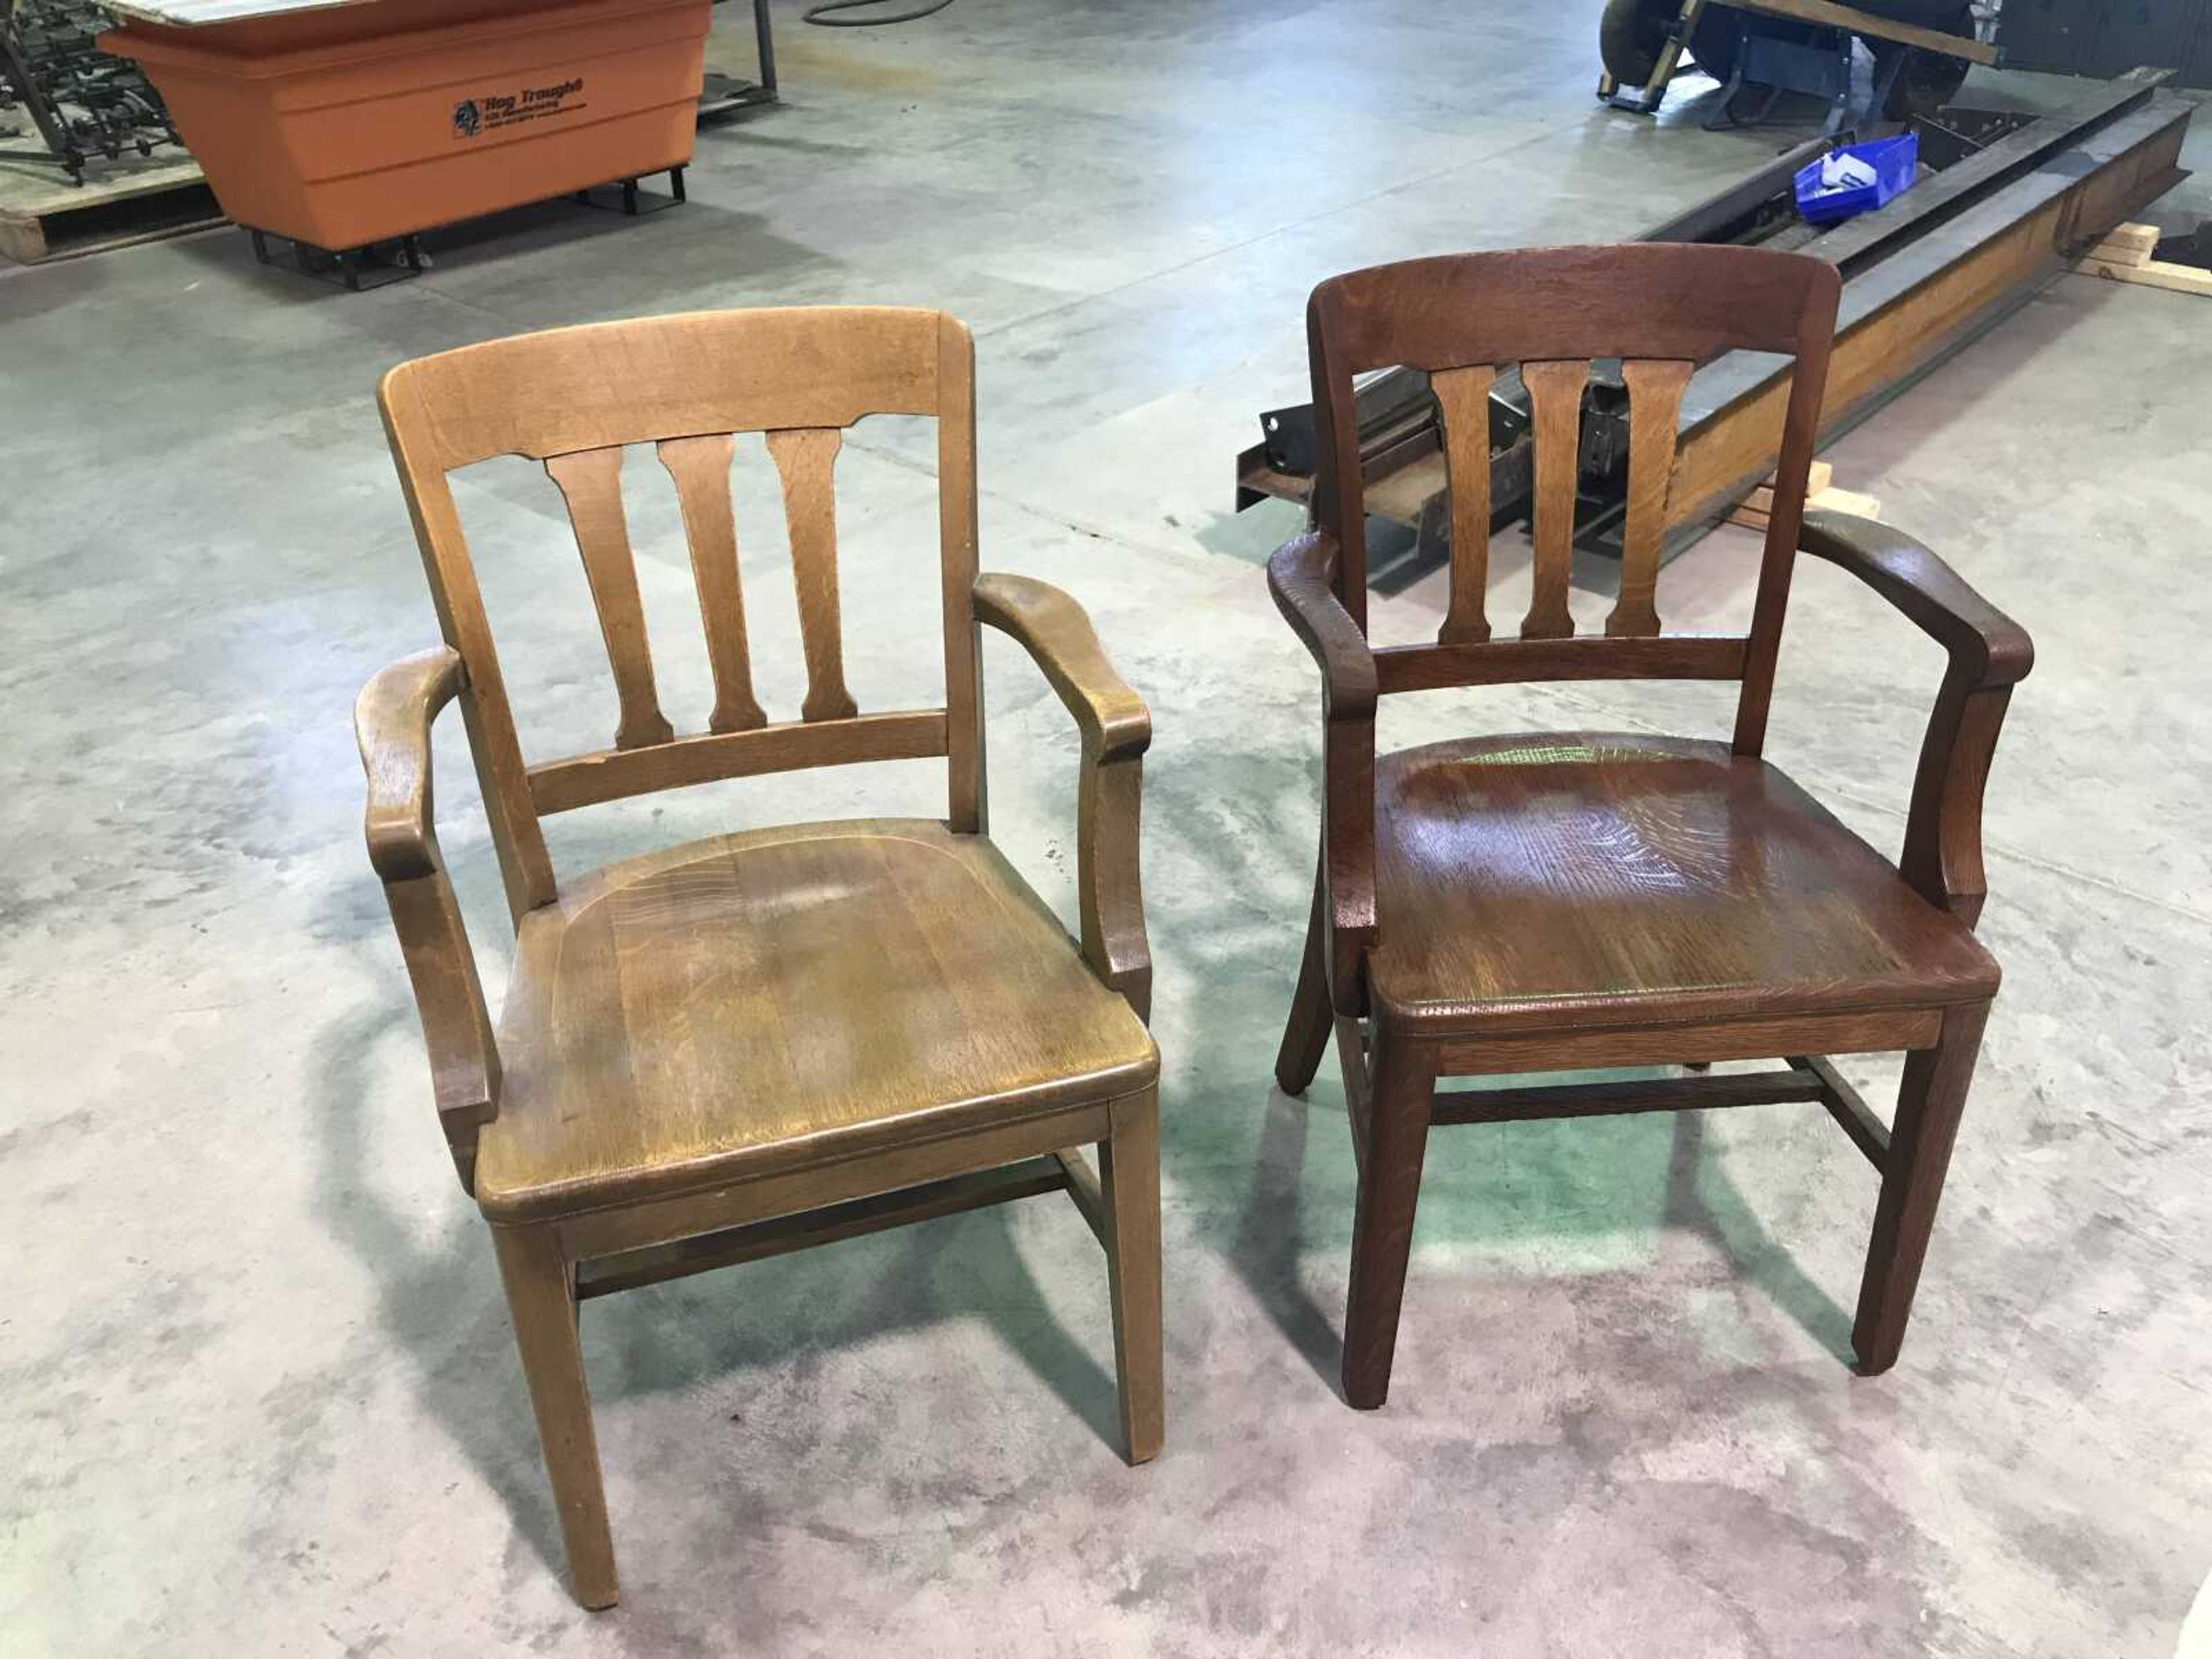 Before and after of the chairs Reckling restored. All chairs were bought in 1939 for the new Kent Library, all made of tigered oak. Only 14 chairs exist currently. The original purchase number for these chairs was 250.